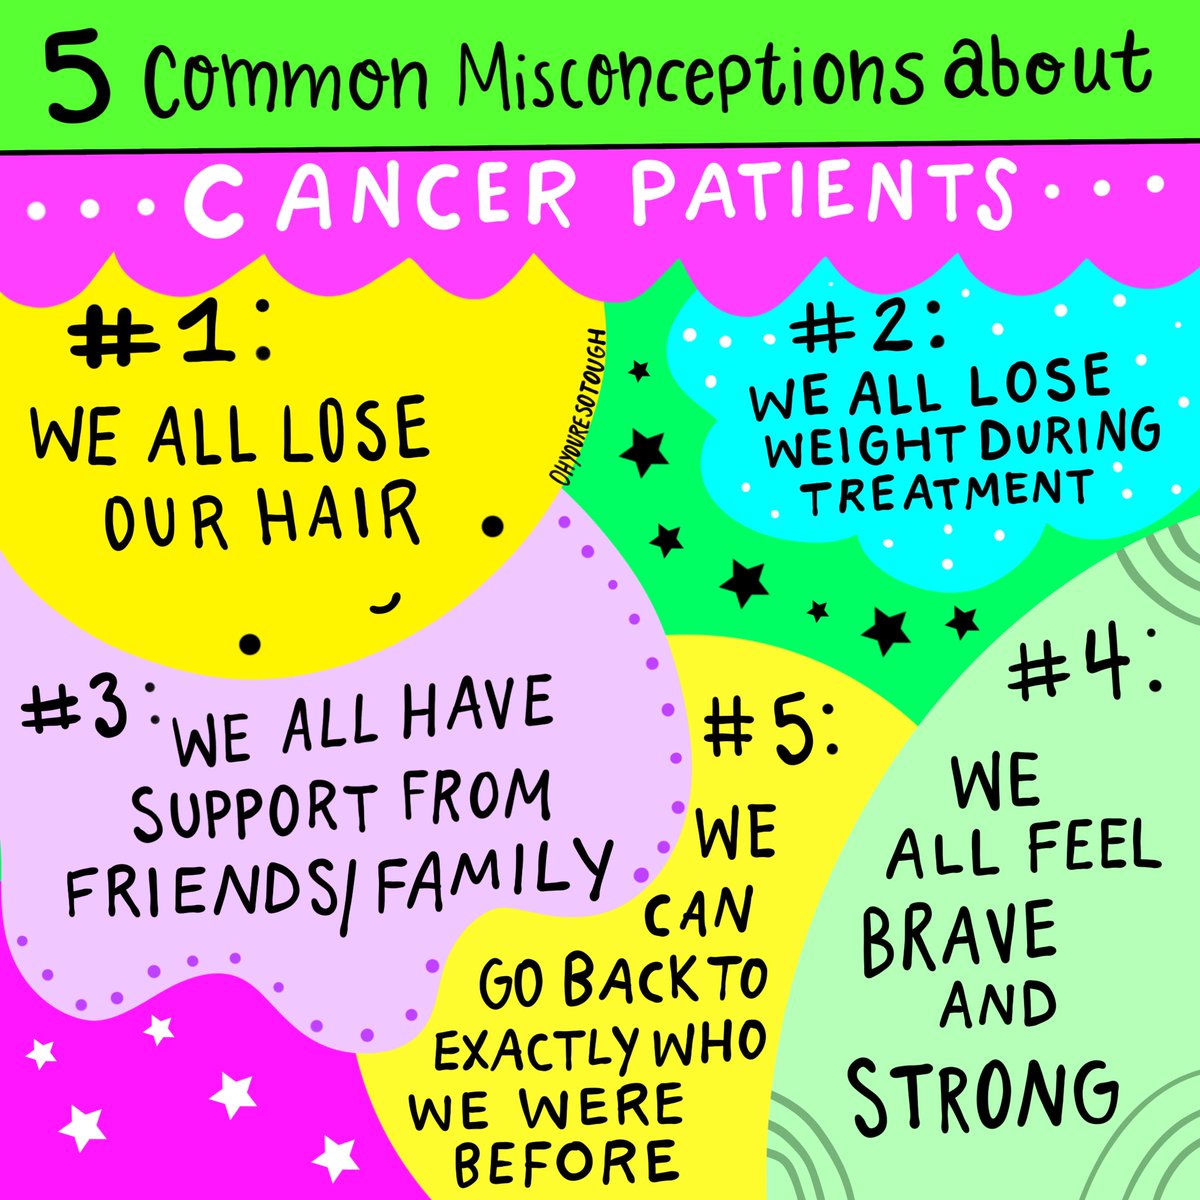 Cancer isn’t a one size fits all experience.